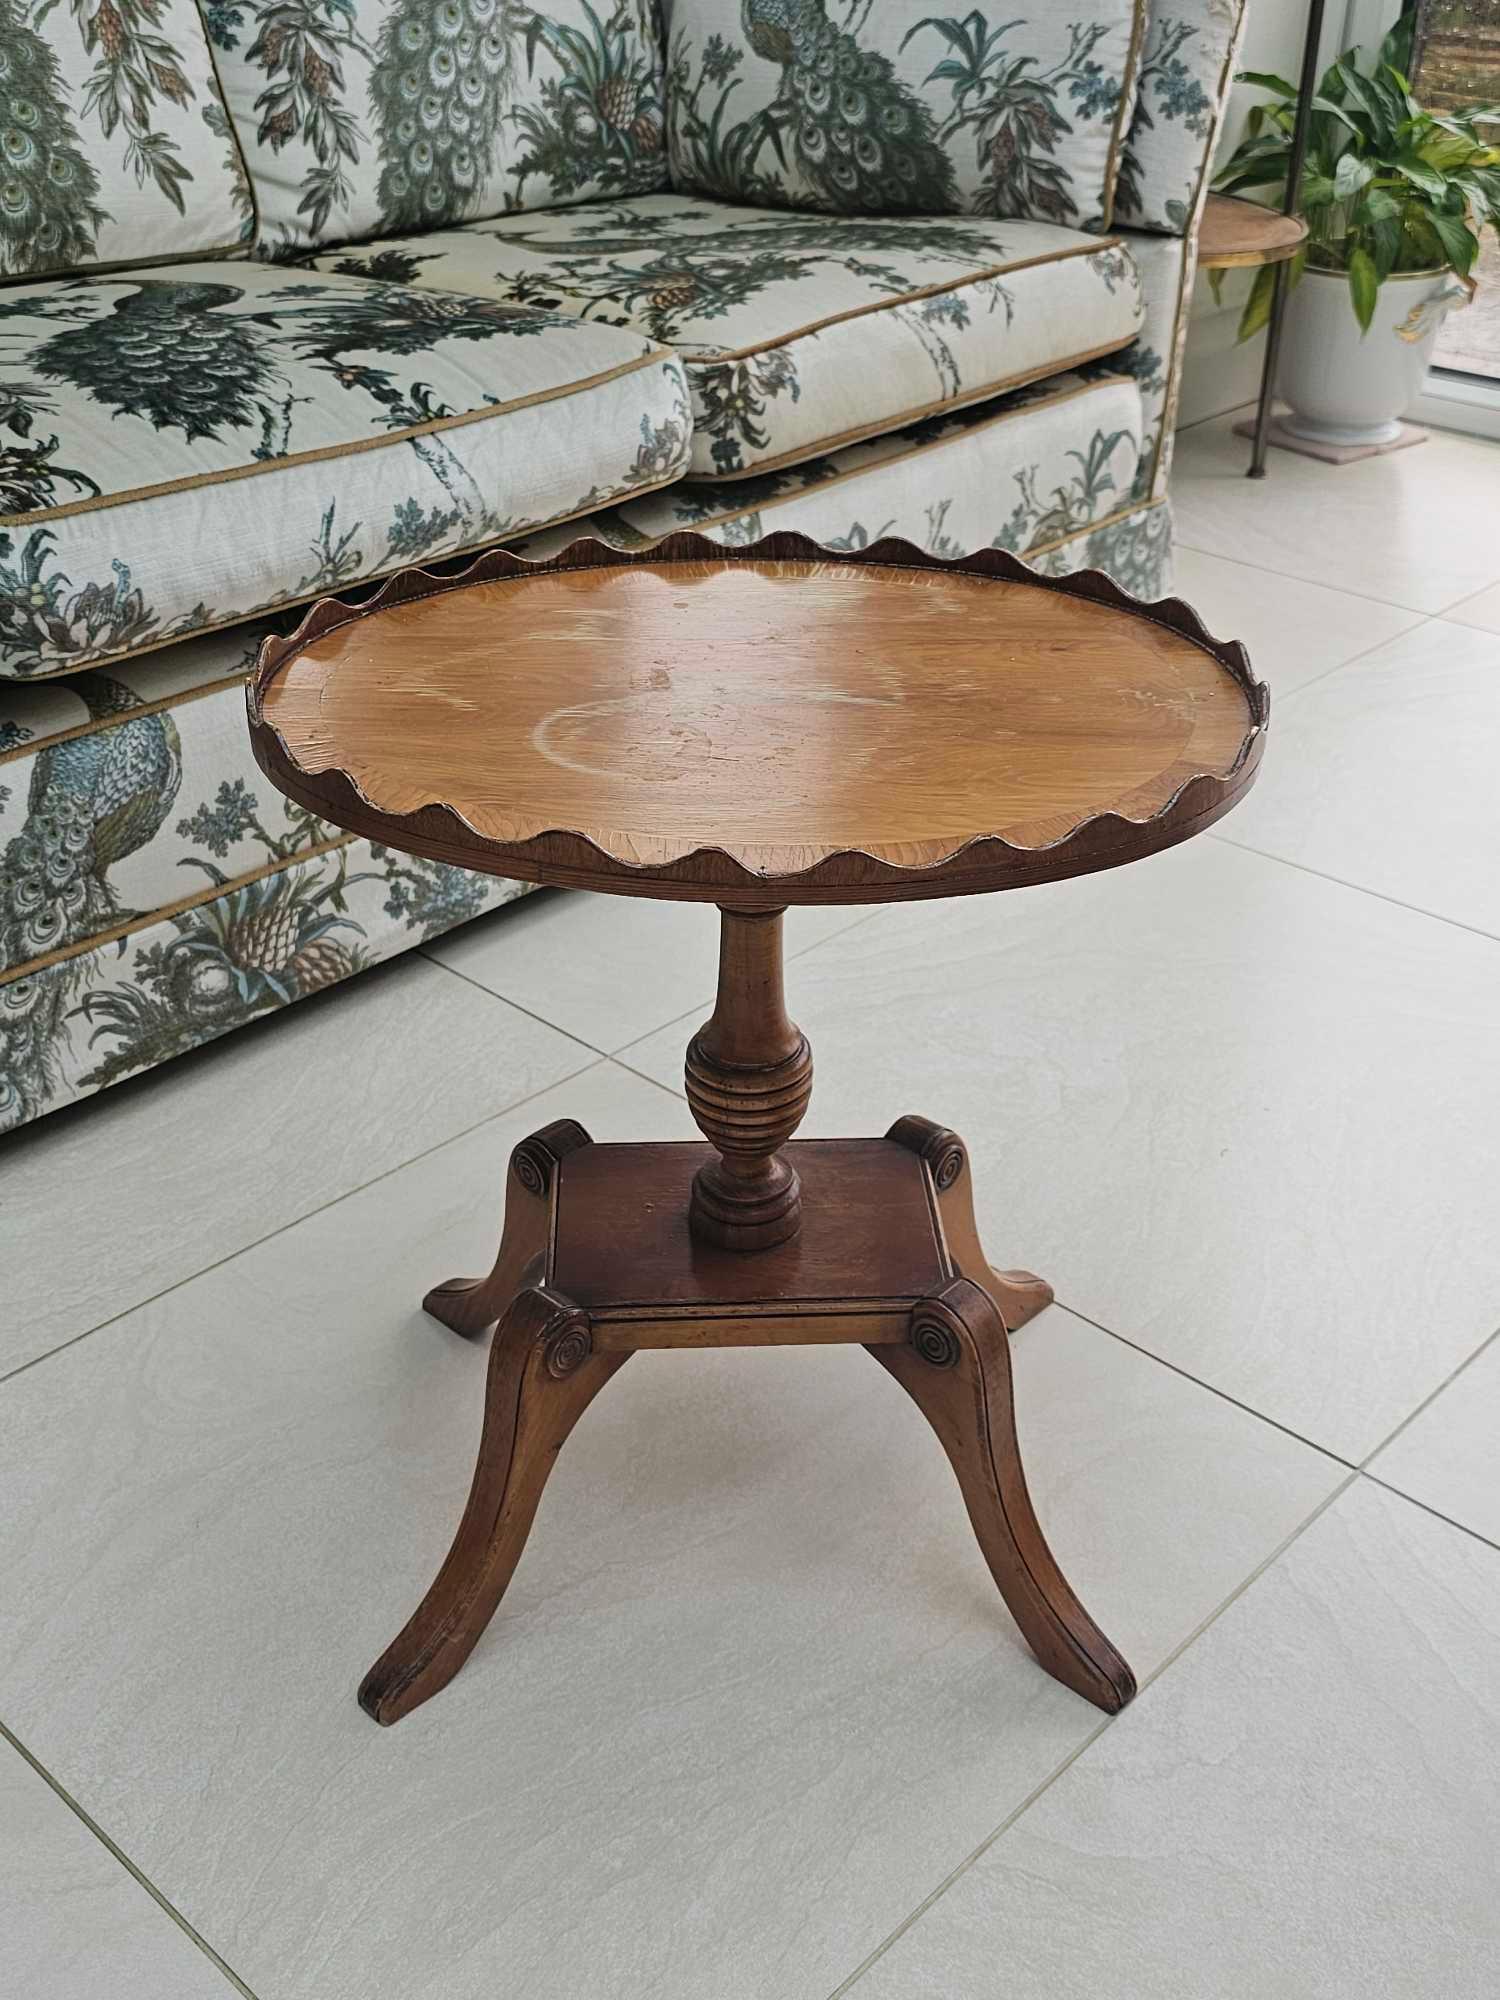 Bevan Funnell Reprodux Oval Mahogany Pedestal Wine Table In The Regency Style Having Shaped Wooden - Image 2 of 4